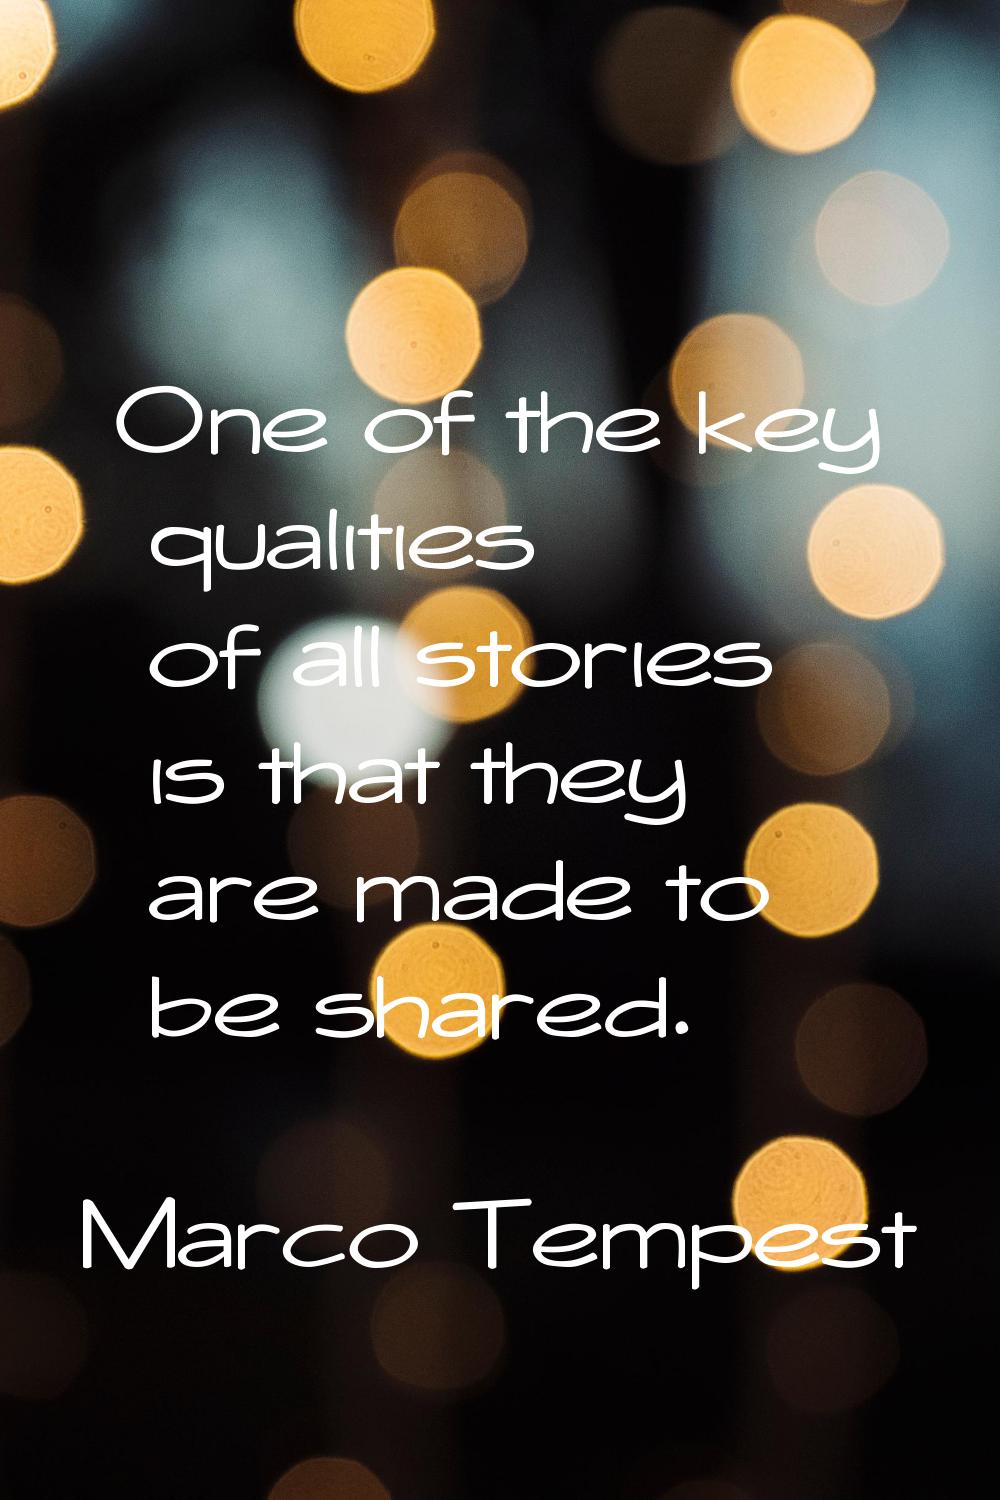 One of the key qualities of all stories is that they are made to be shared.